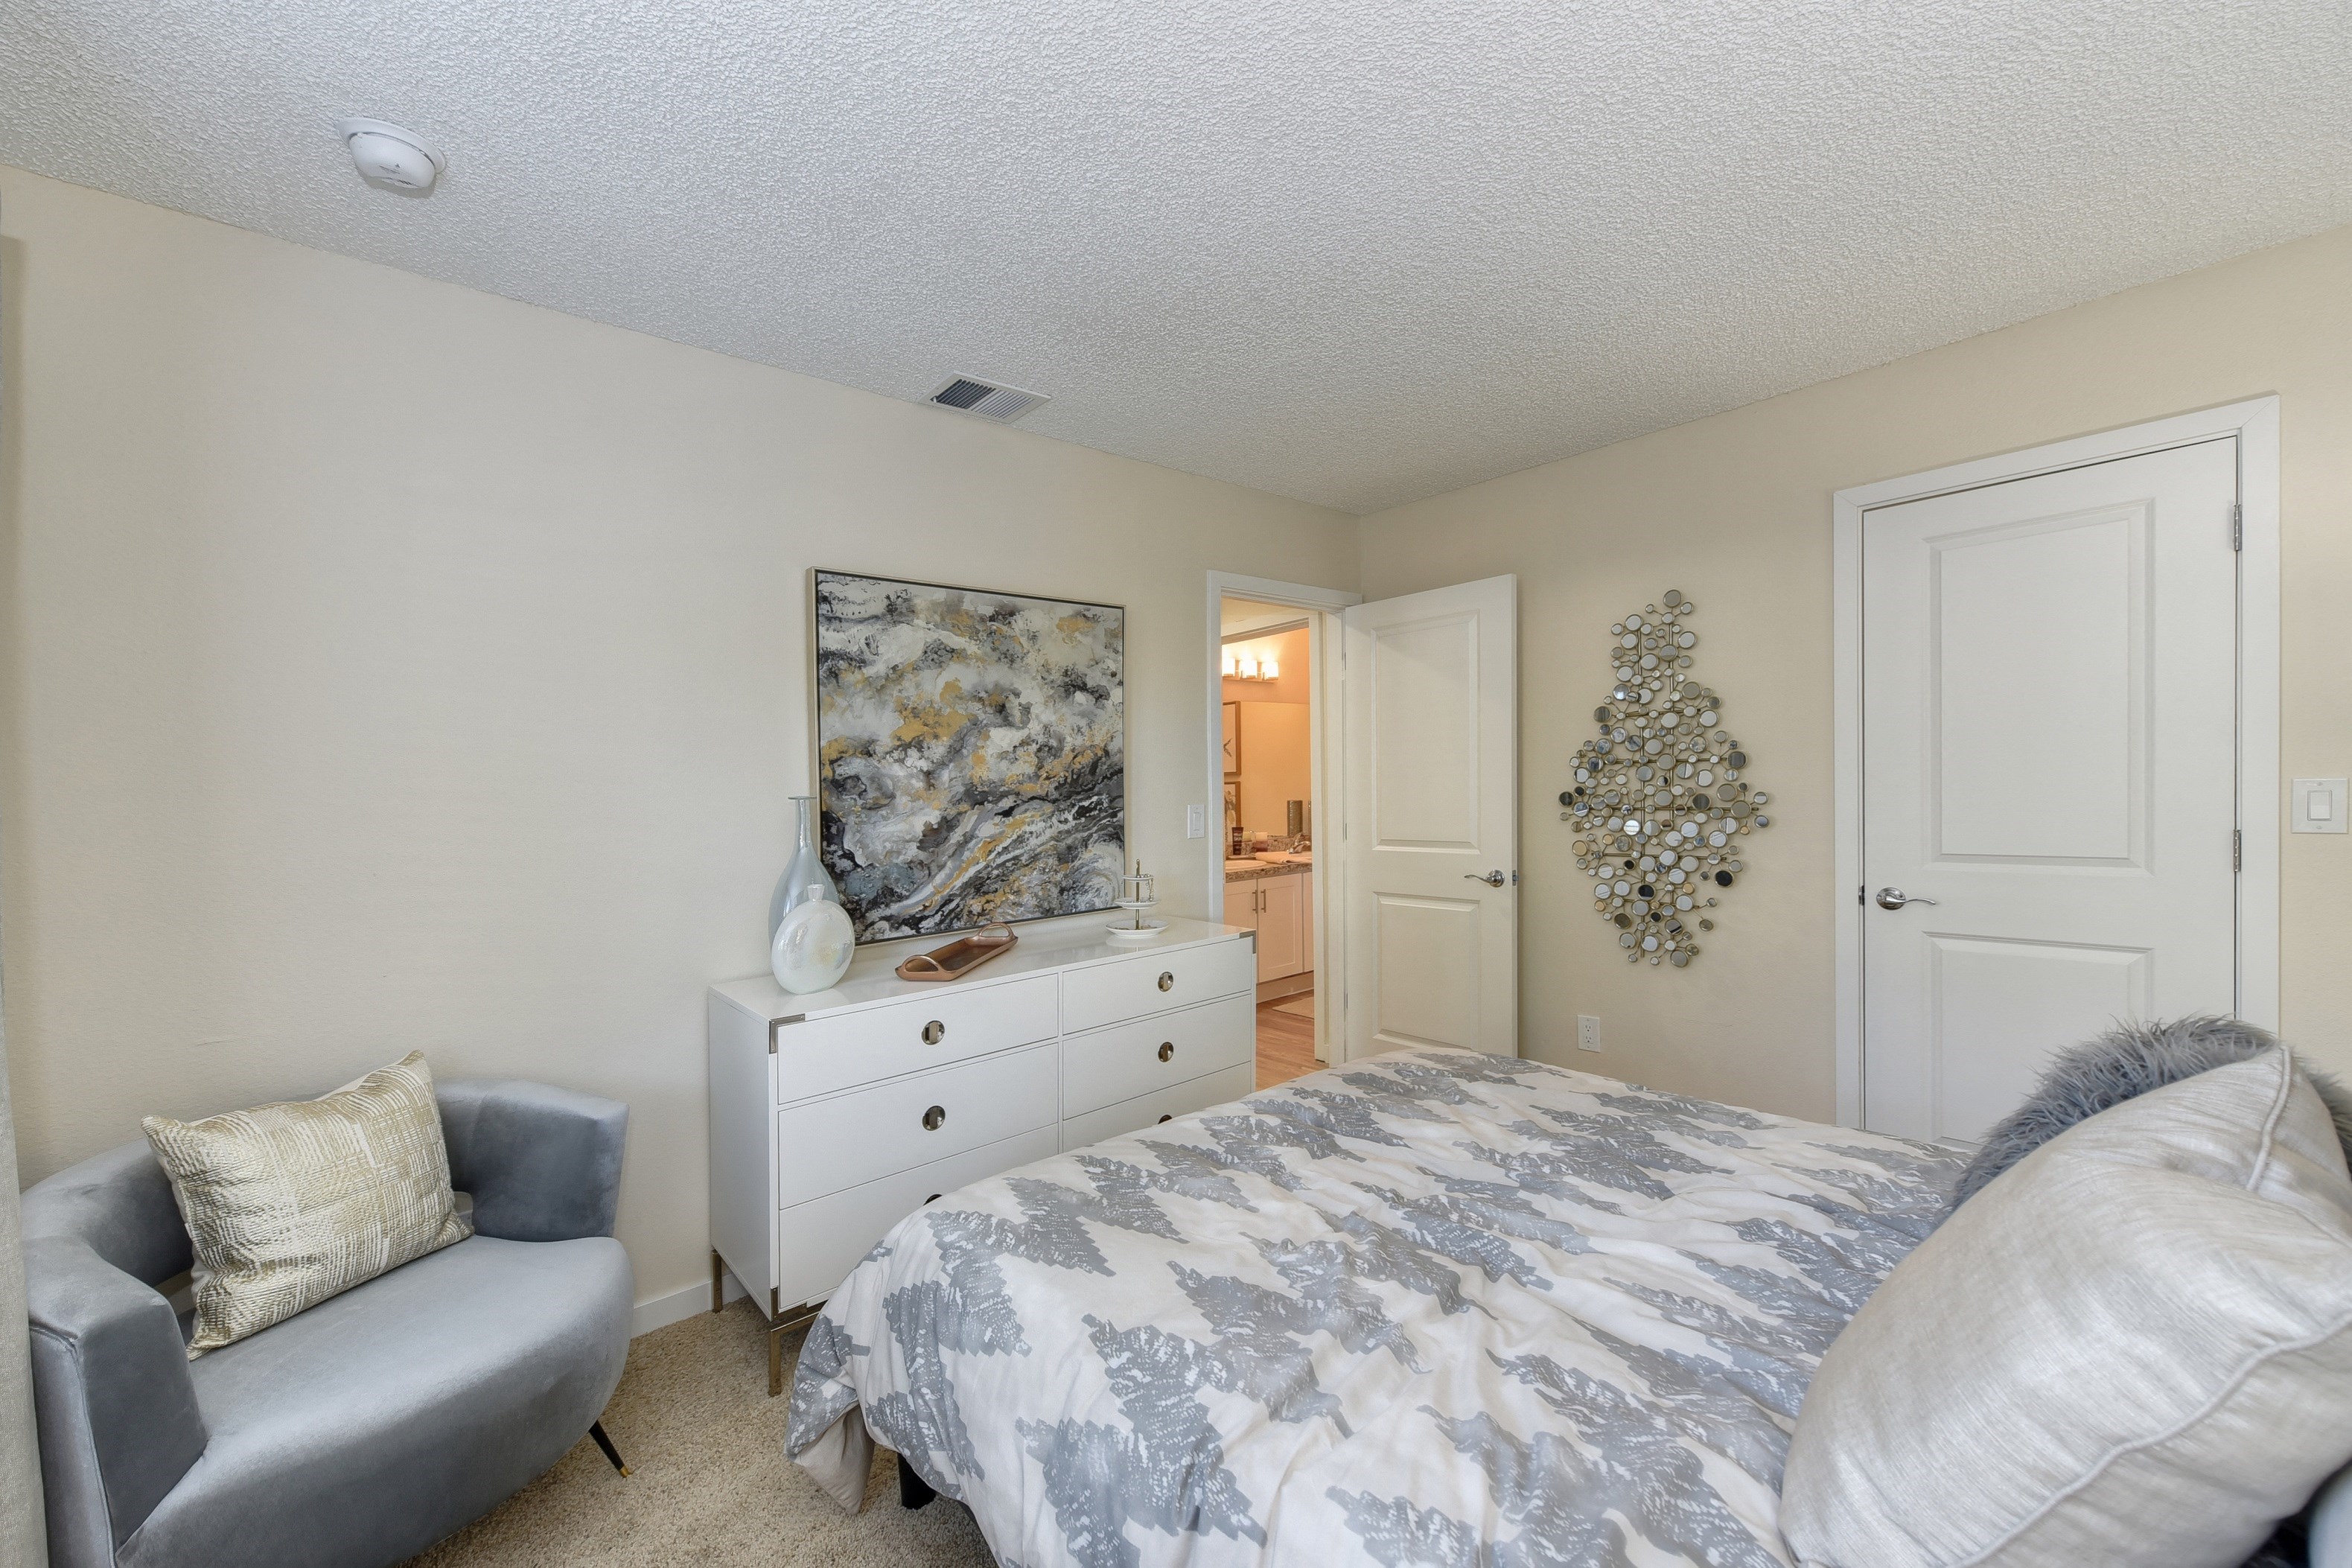 Bedroom with Attached Bath, Carpet, White Dresser and Gray Chair